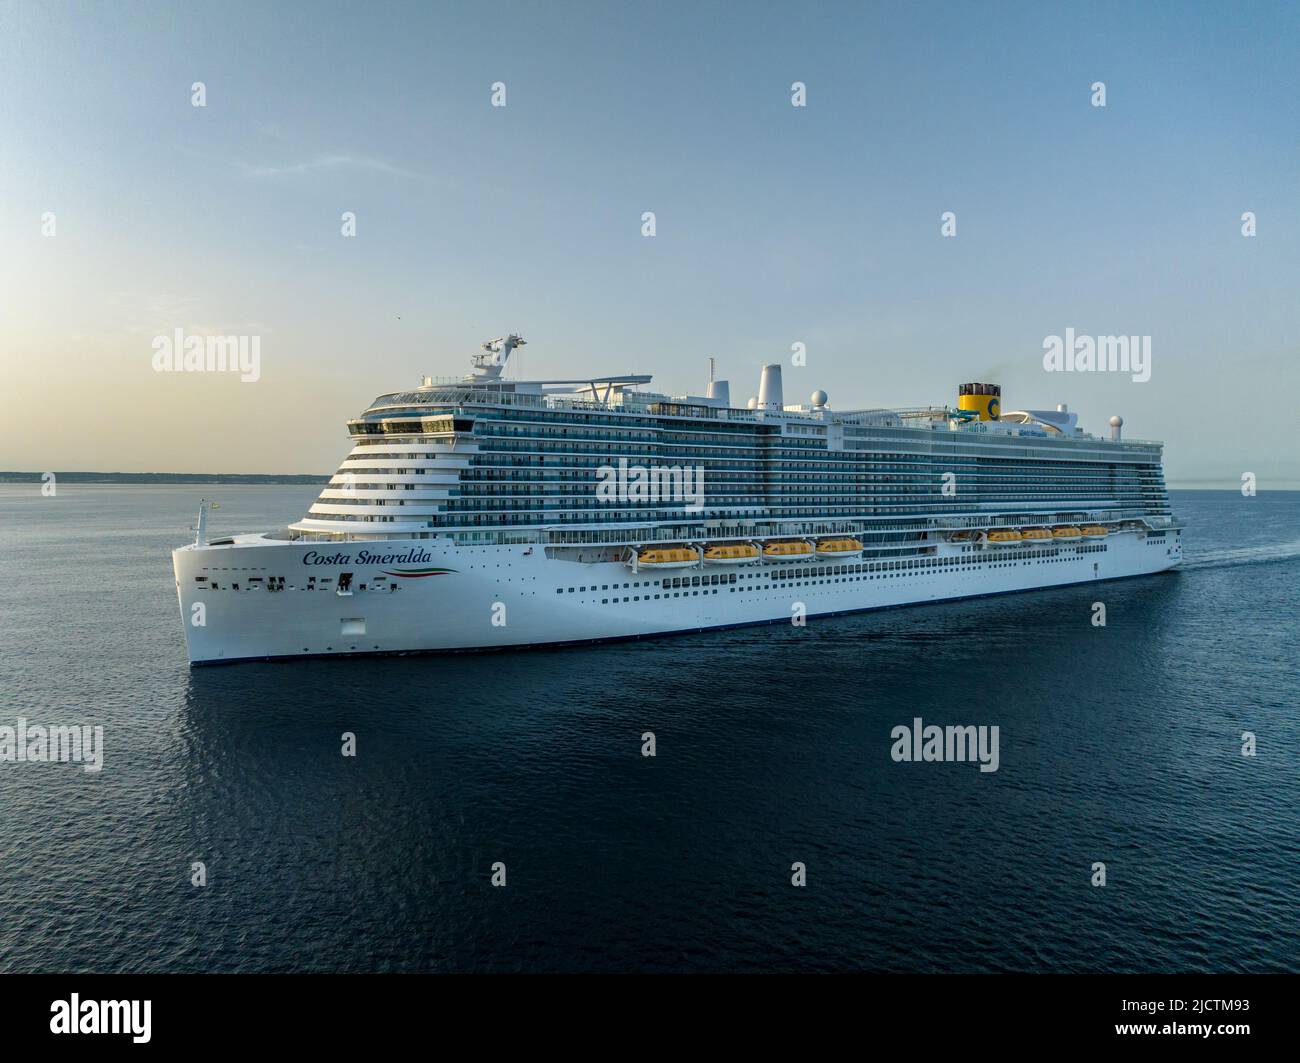 Costa Smeralda is an Excellence-class cruise ship currently operated by Costa Cruises, a subsidiary of Carnival Corporation.  aerial view. Stock Photo